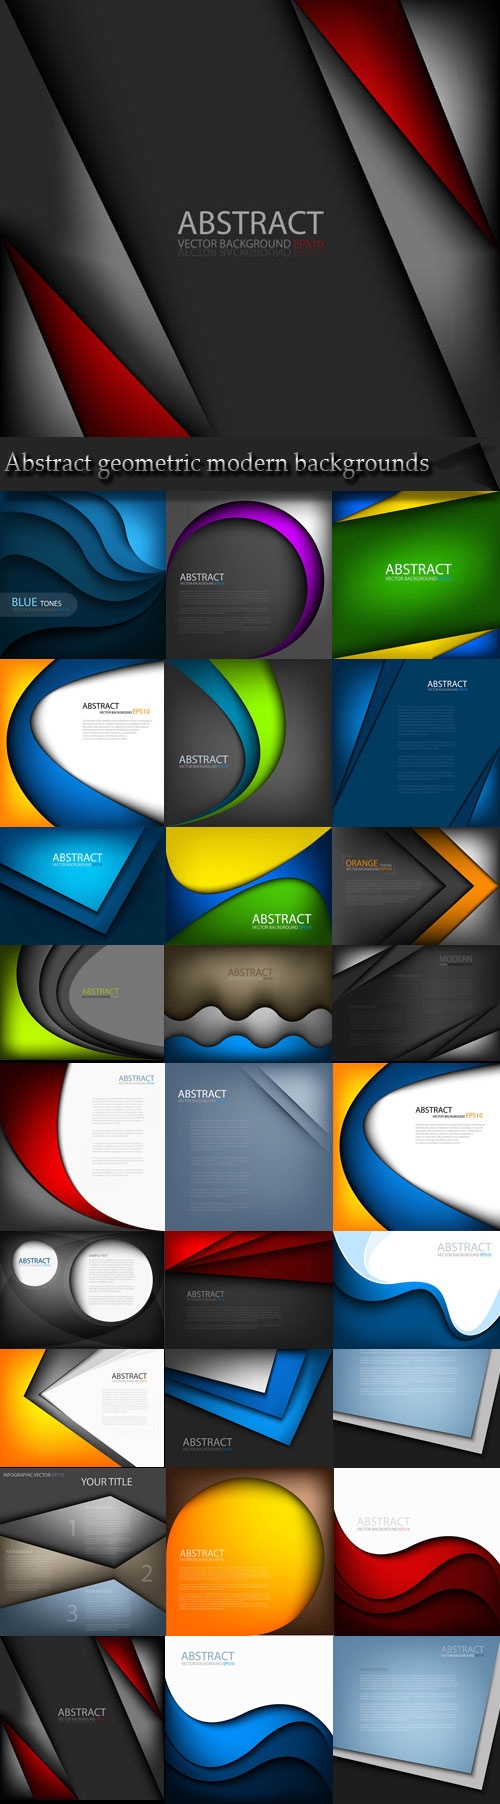 Abstract geometric modern backgrounds